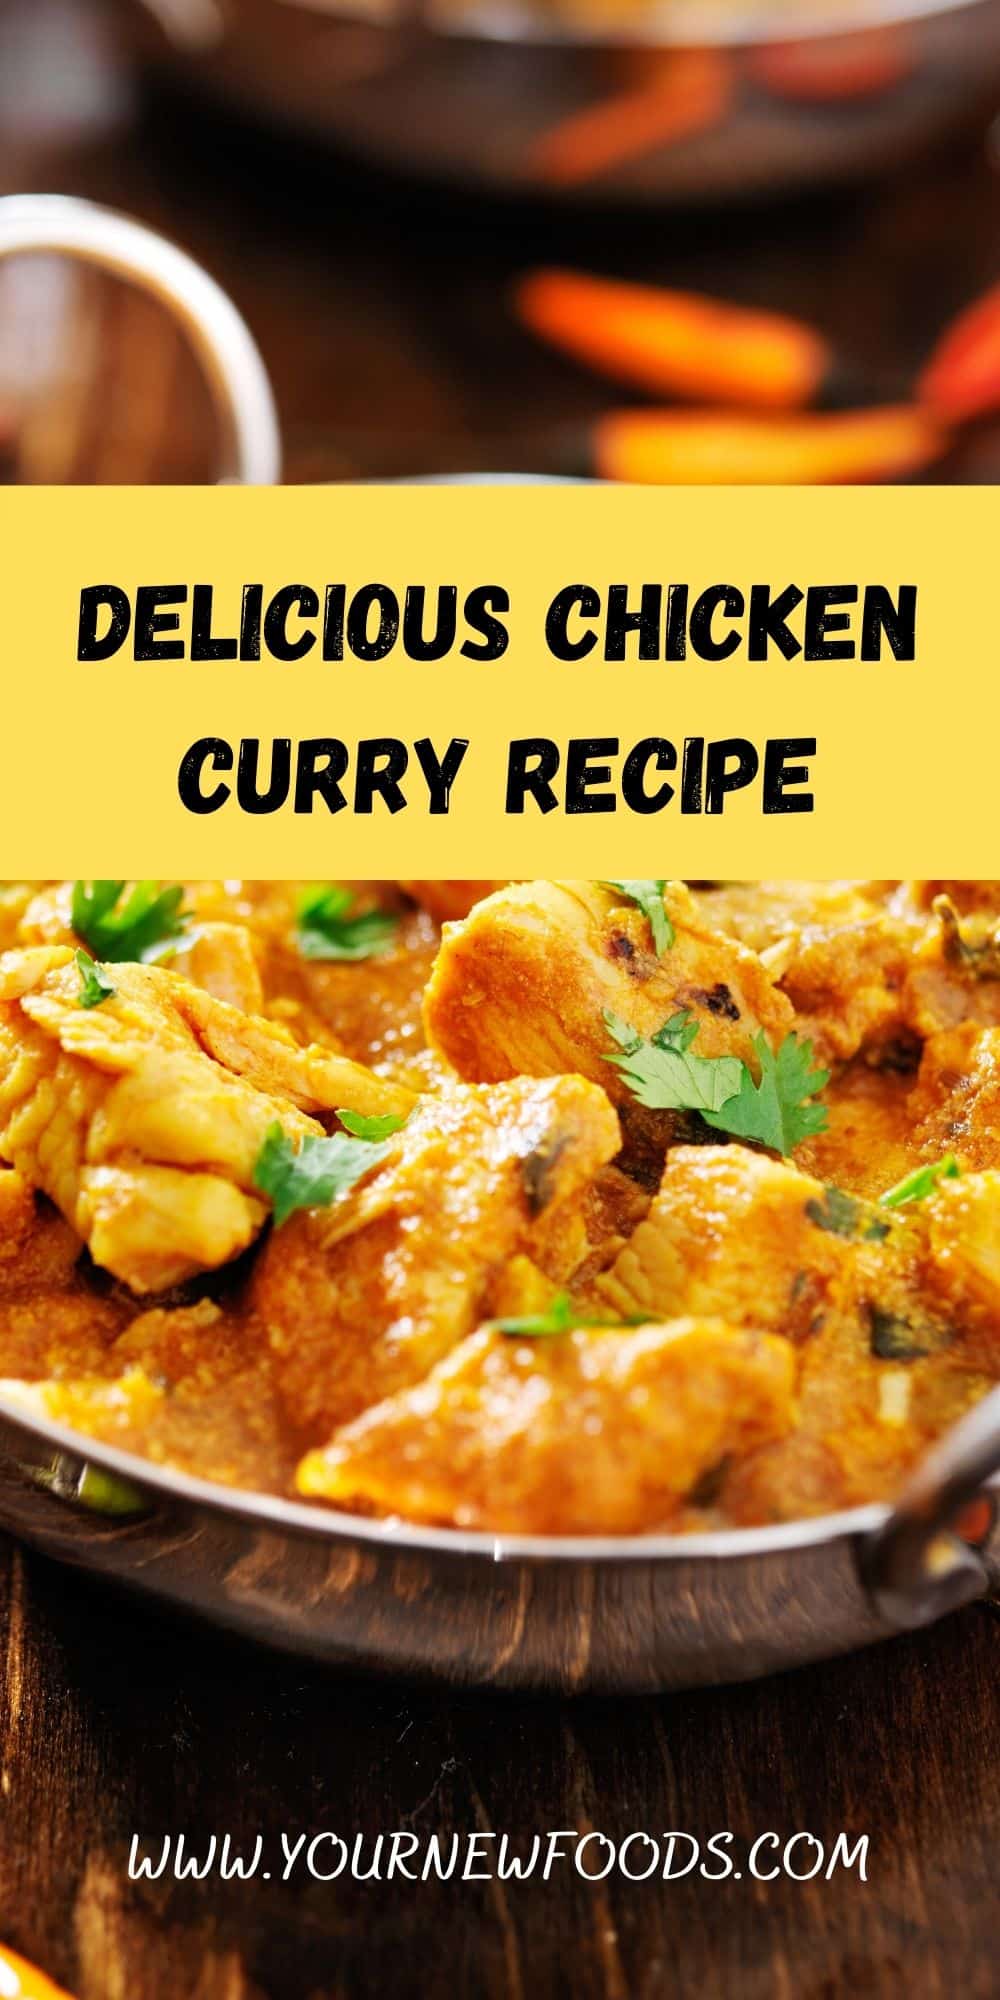 advertising banner showing delicious Chicken Curry Recipe in silver Balti style dishes with bowls of rice on a wooden table